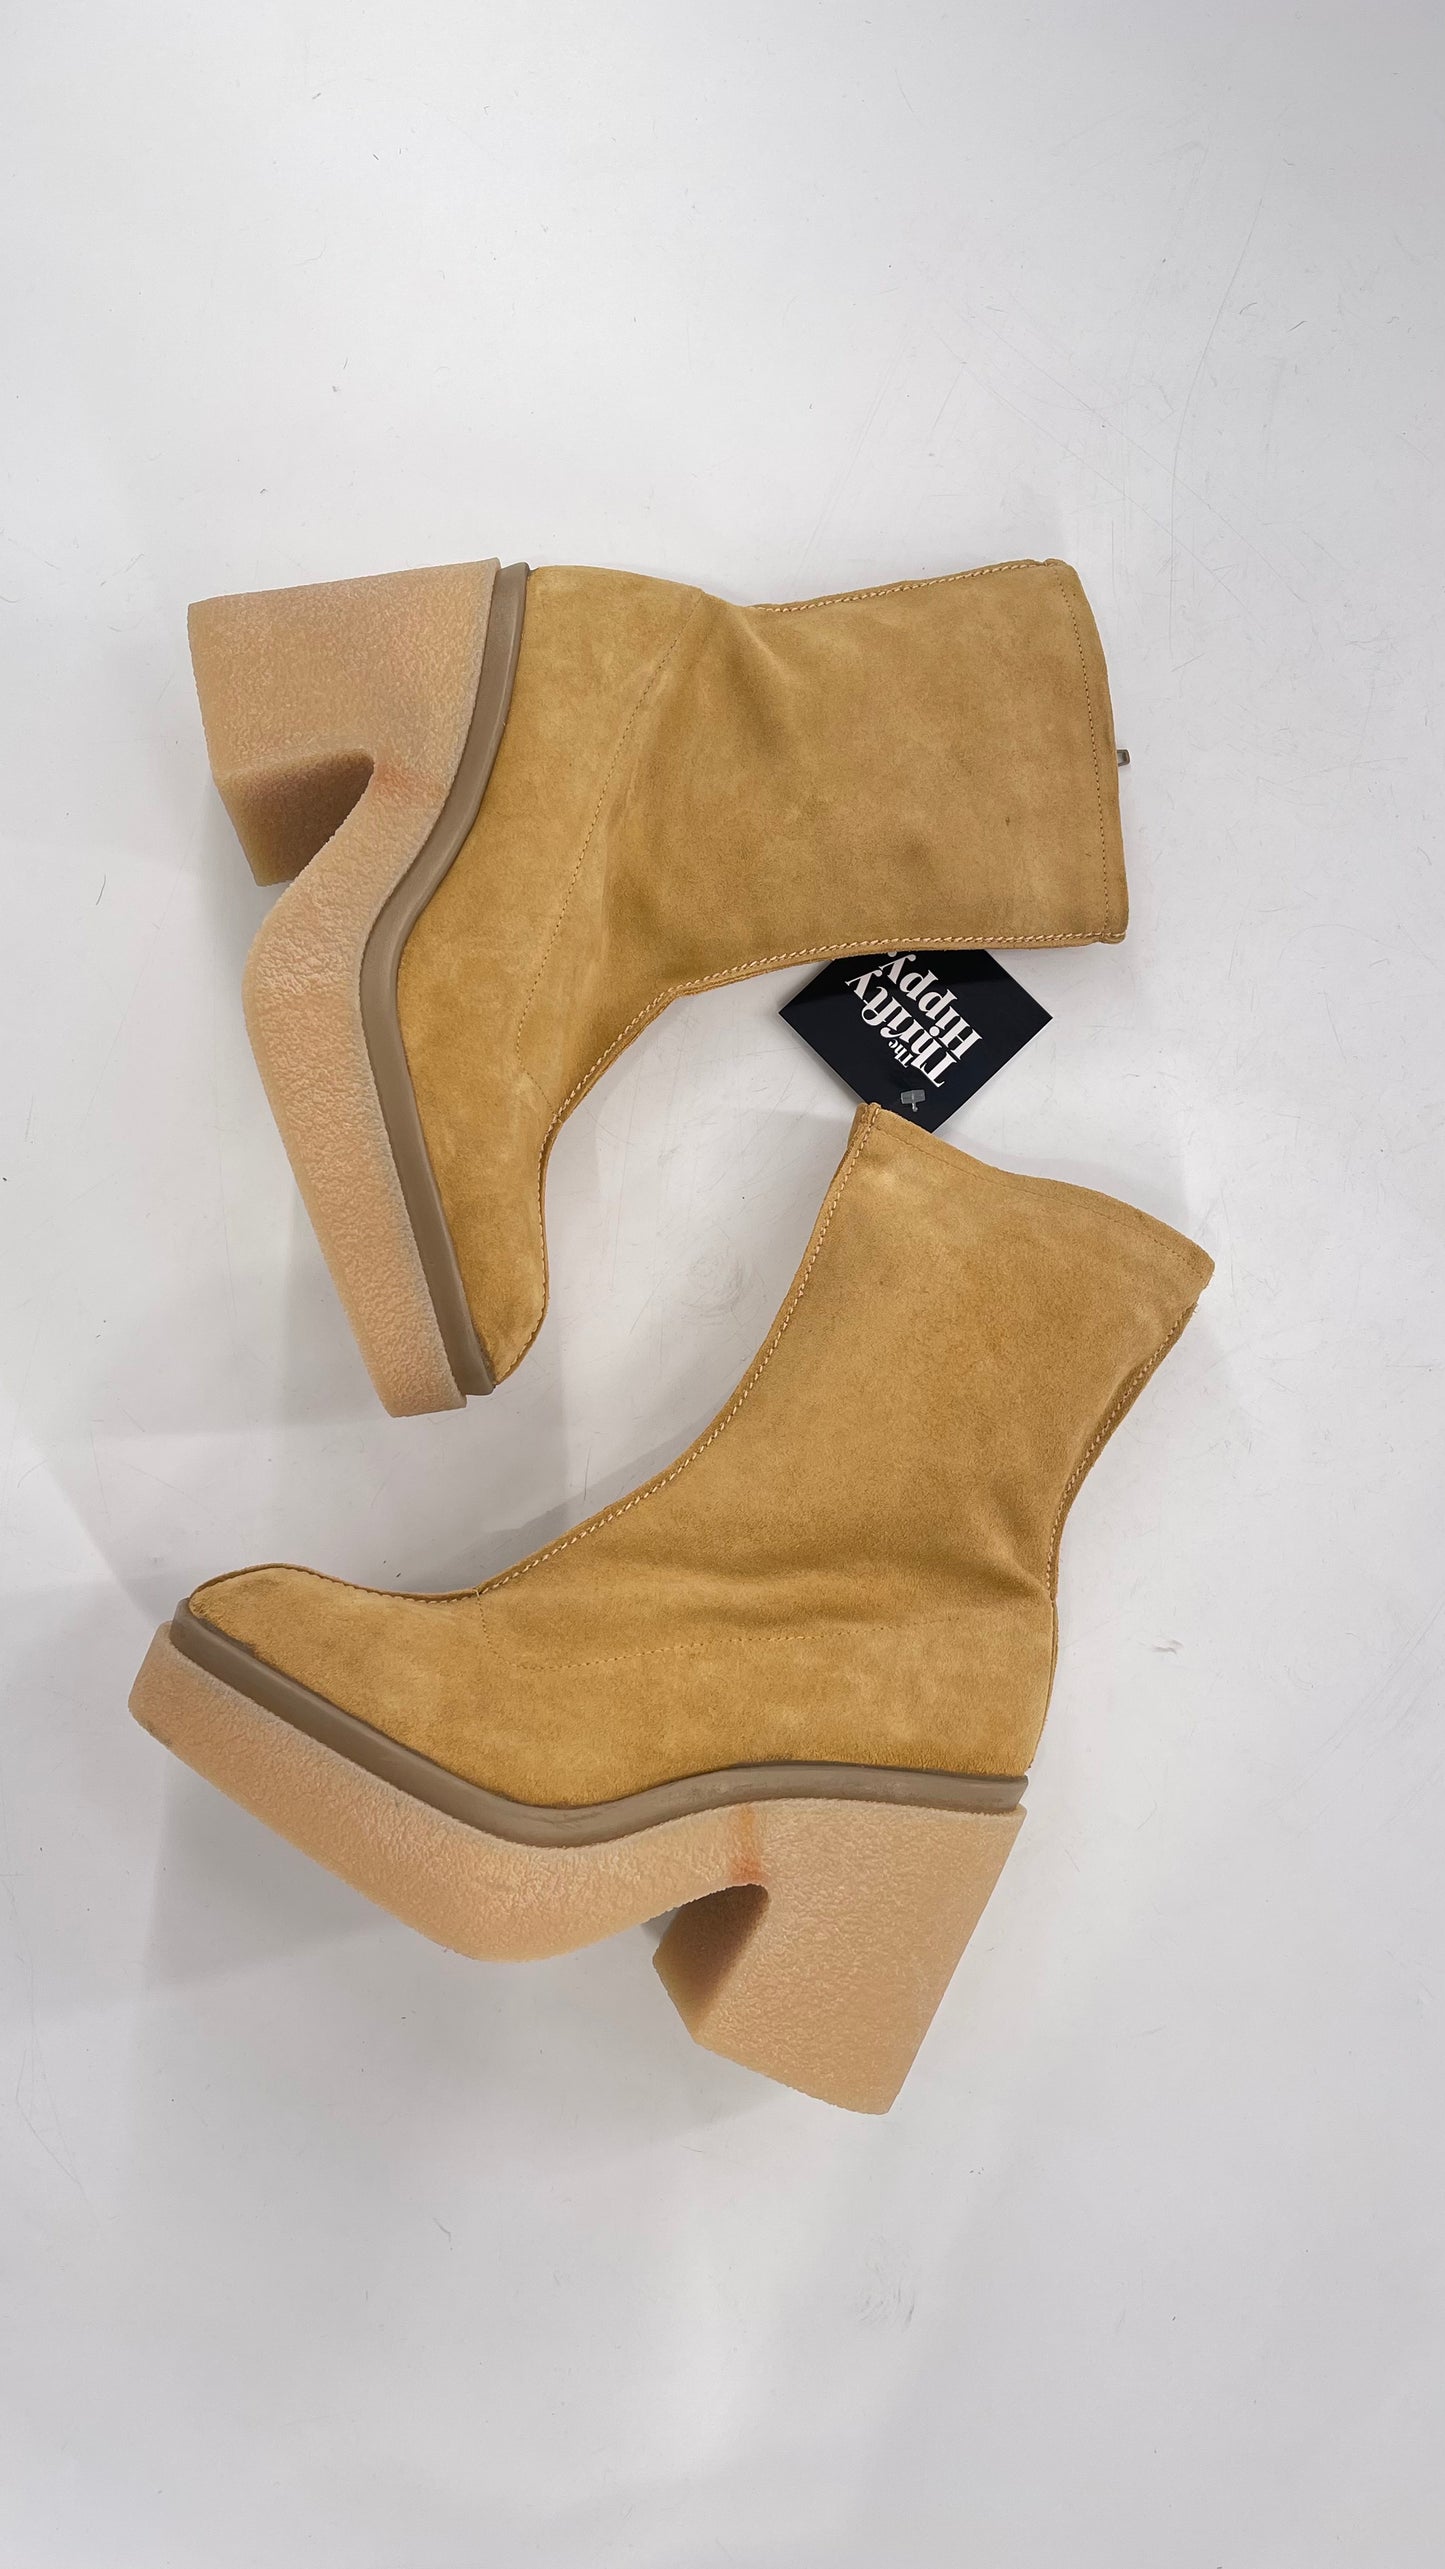 Free People Gigi Tan Suede Ankle Boots with Platform and Chunky Rubber Heel (38.5)